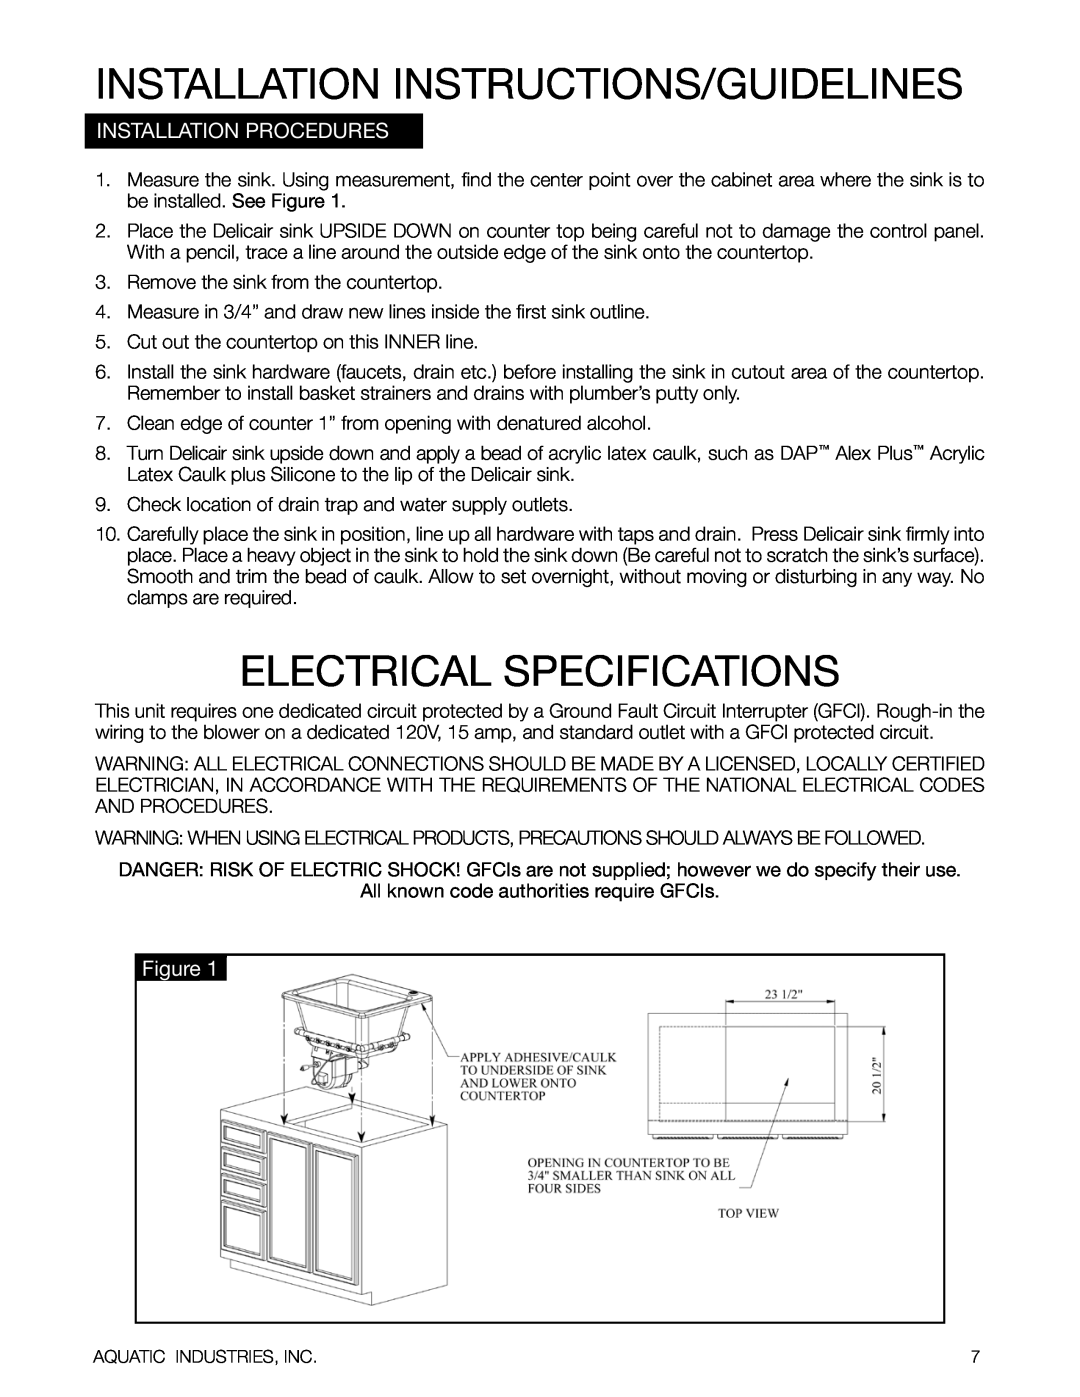 Aquatic Delicair Laundry Basin Electrical Specifications, Installation Instructions/Guidelines, Installation Procedures 